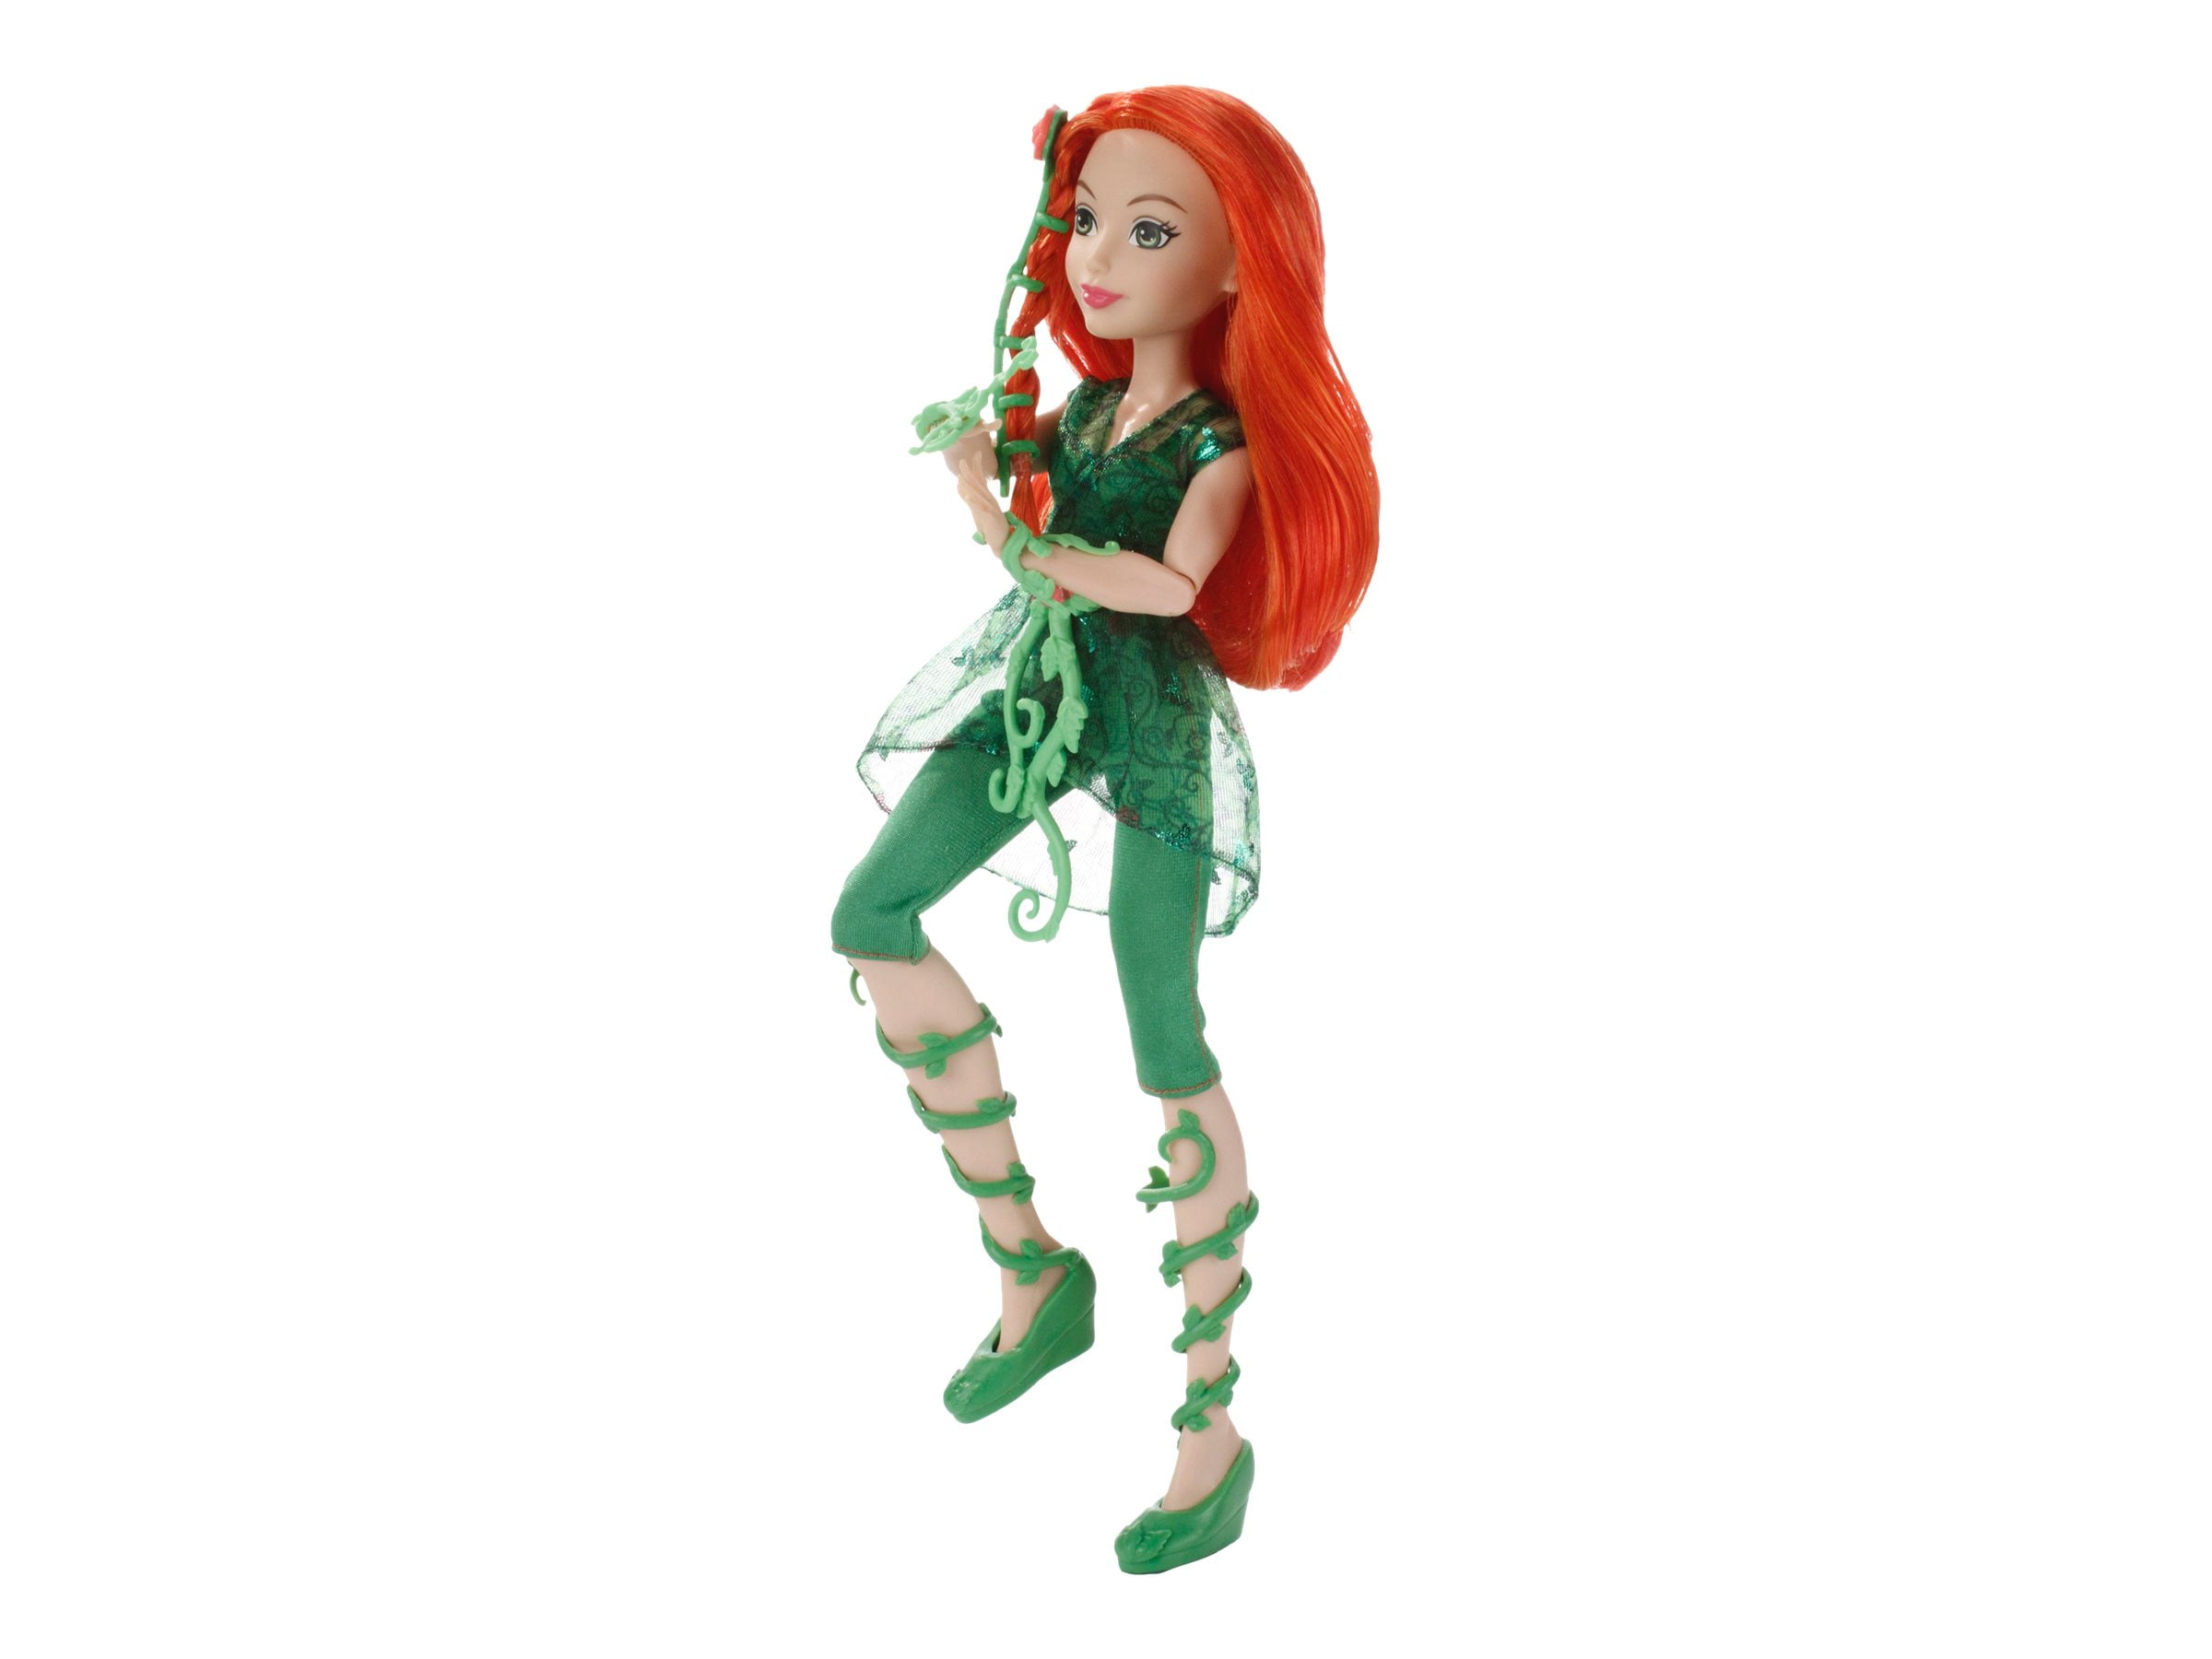 DC Super Hero Girls Poison Ivy 12 inch Action Figure Doll New Comics Mattel Toy 